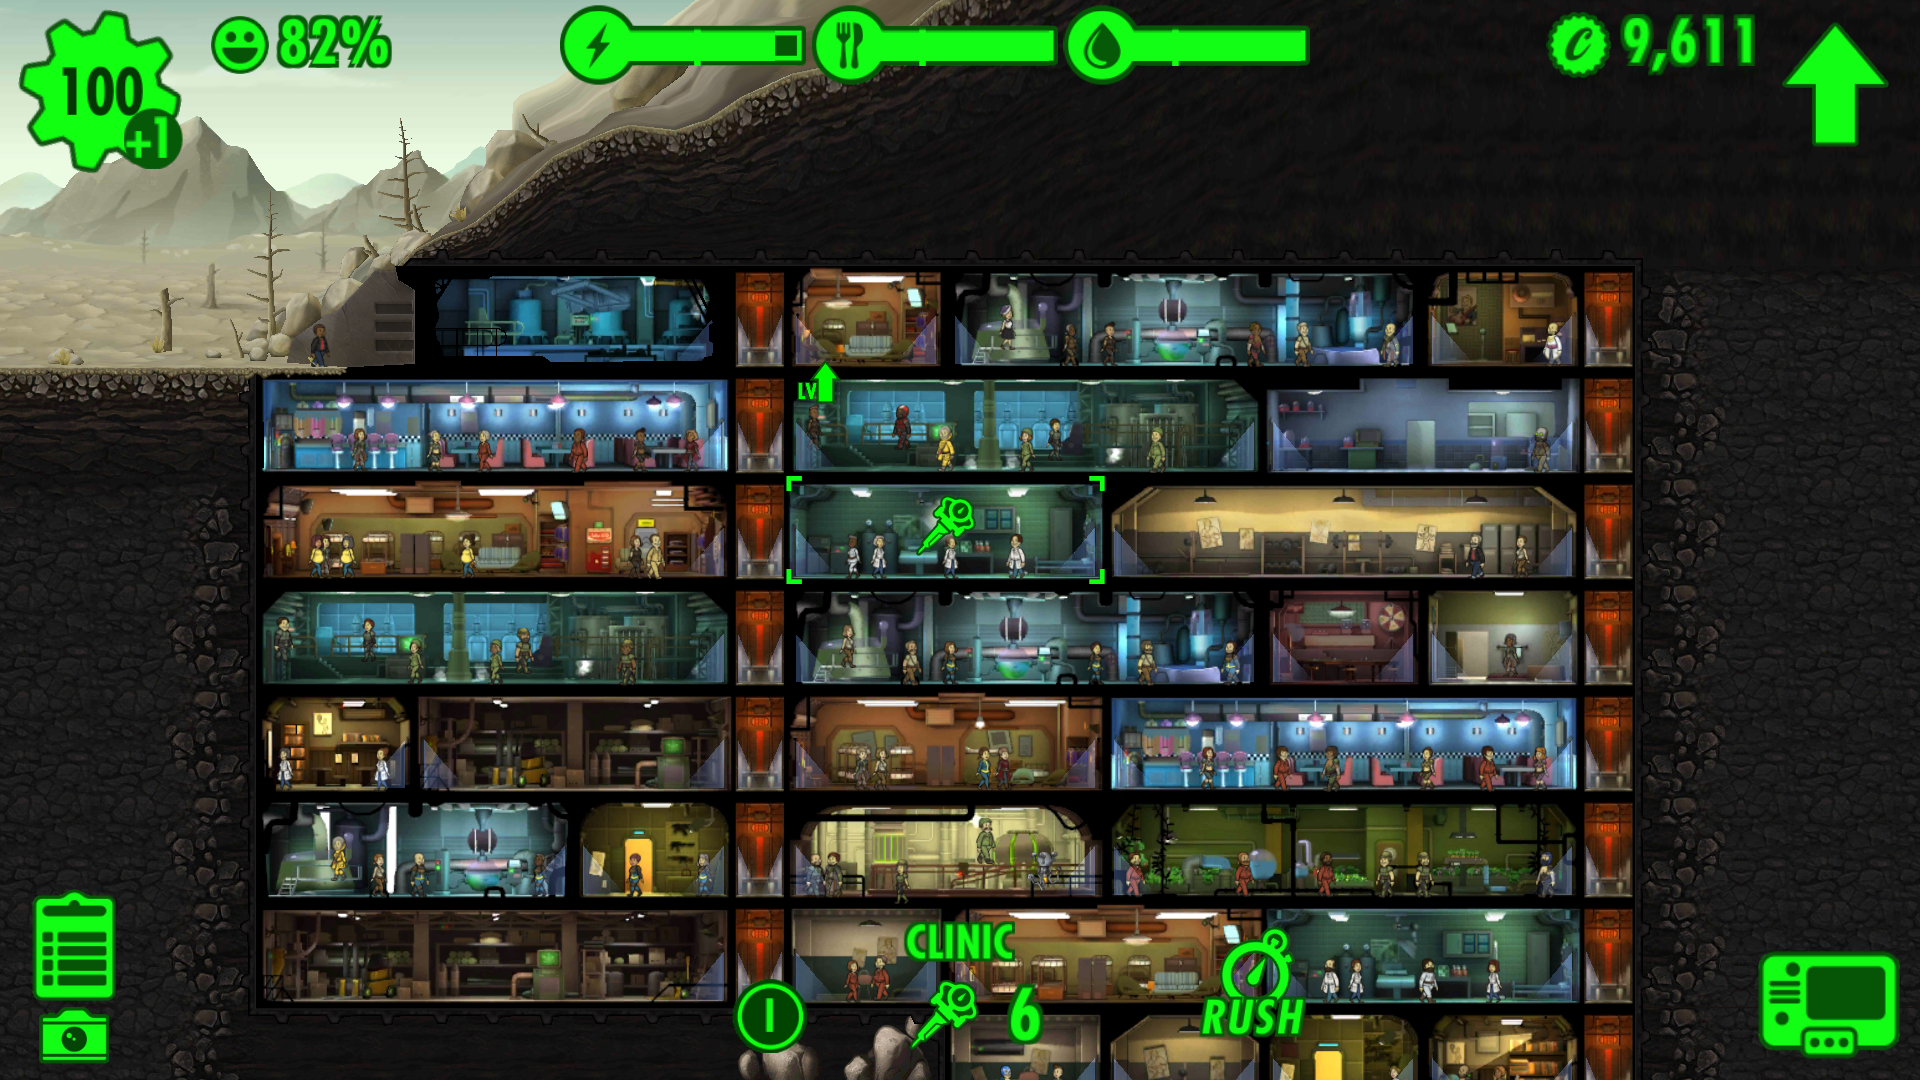 can you move a room, fallout shelter